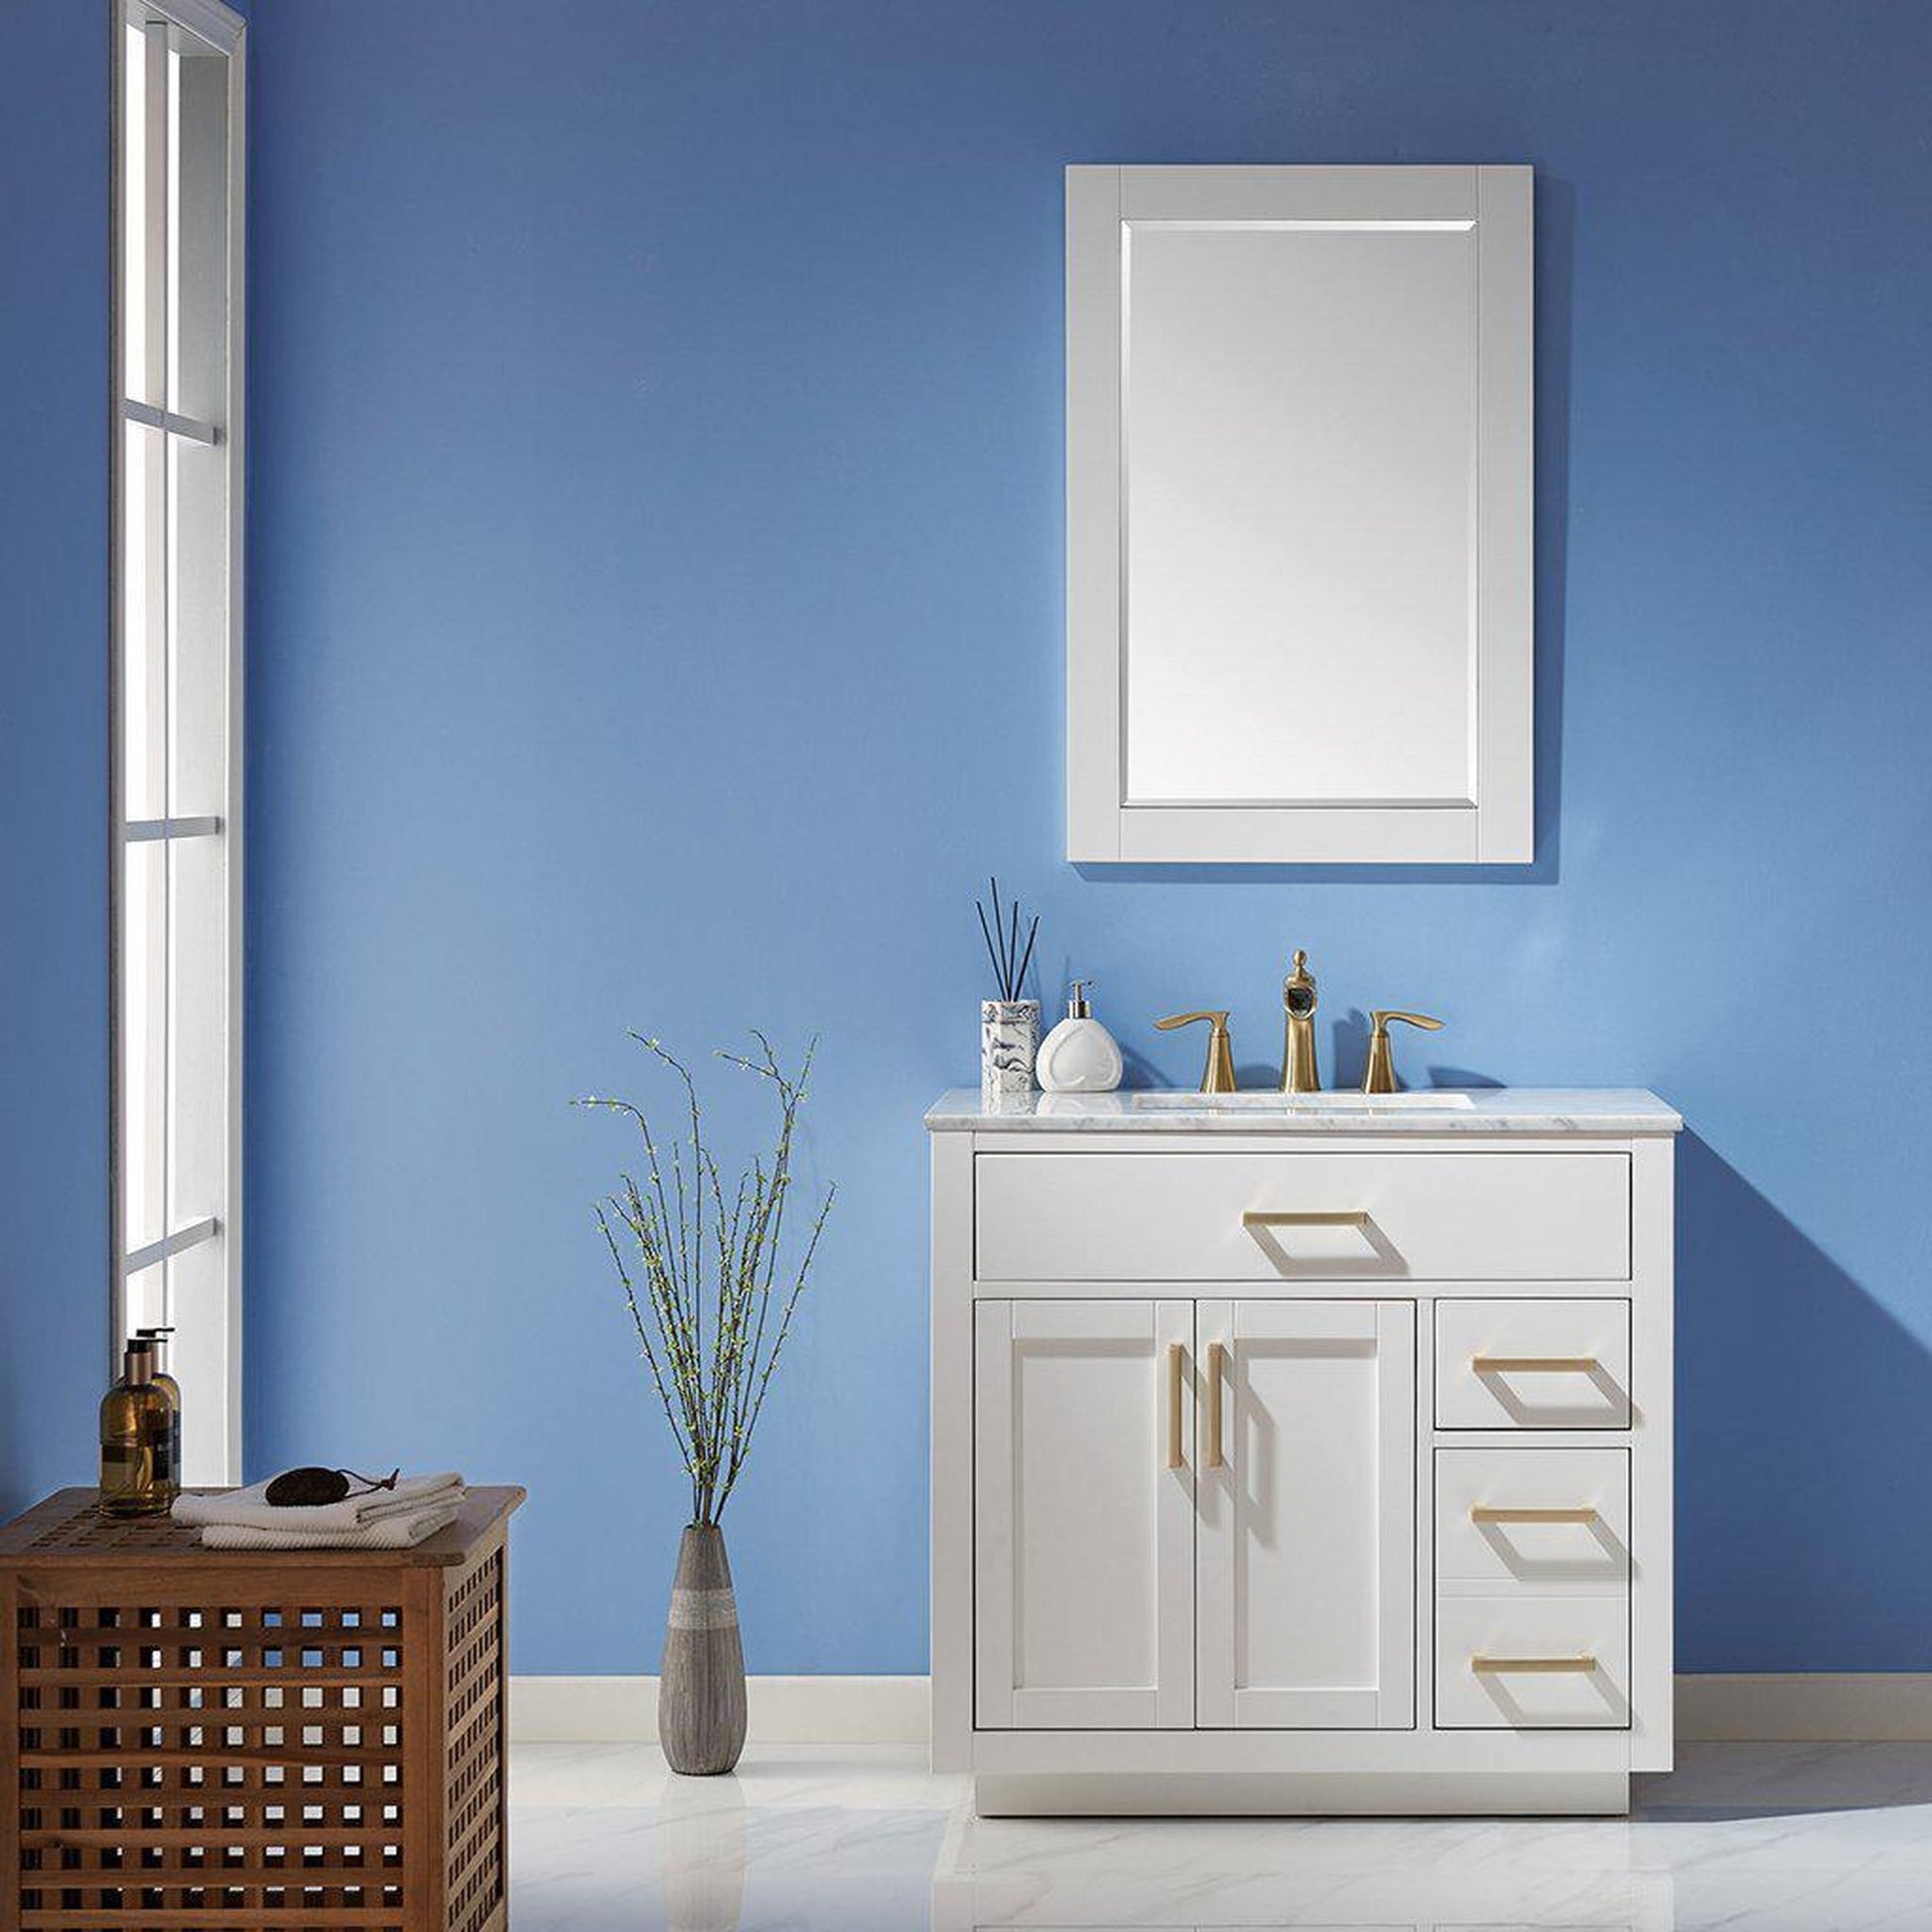 Altair Ivy 36" Single White Freestanding Bathroom Vanity Set With Mirror, Natural Carrara White Marble Top, Rectangular Undermount Ceramic Sink, and Overflow